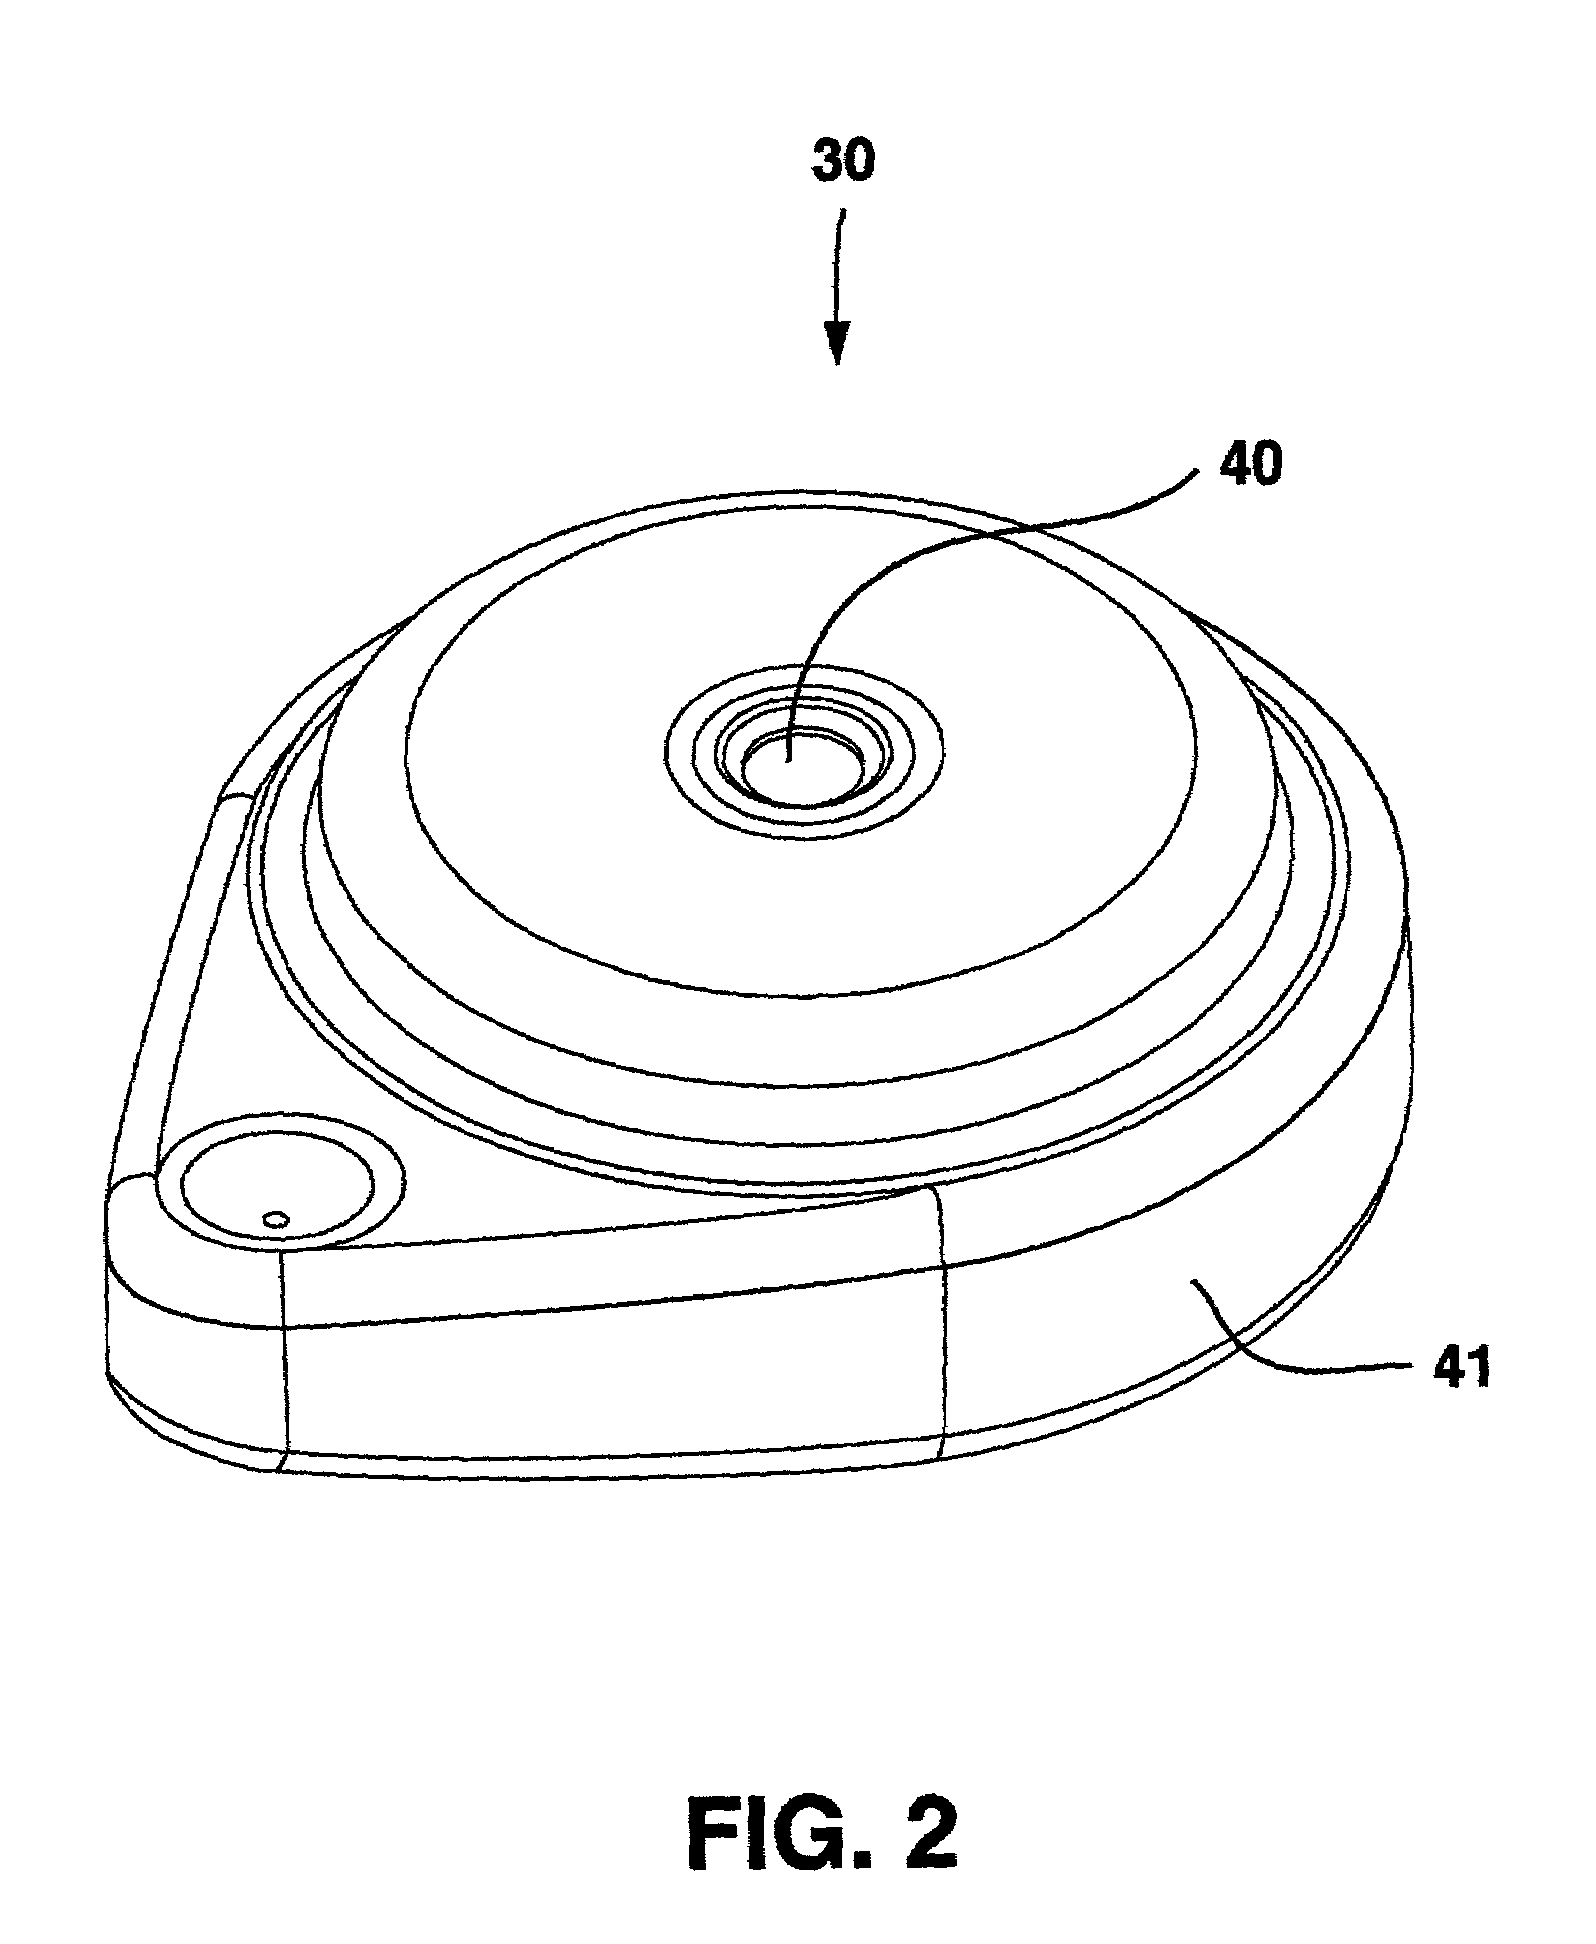 Implantable infusion device with optimized peristaltic pump motor drive